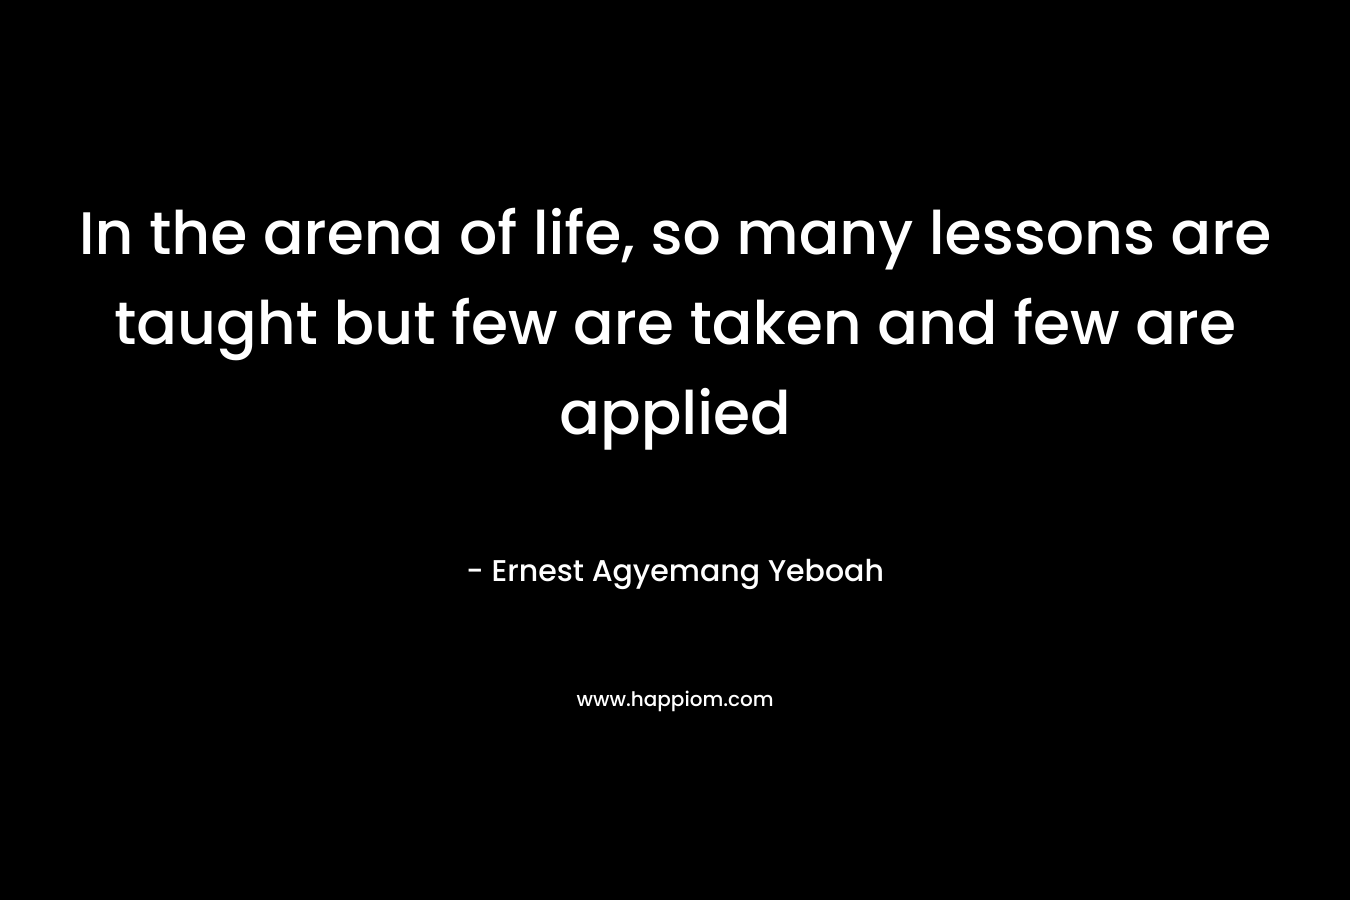 In the arena of life, so many lessons are taught but few are taken and few are applied